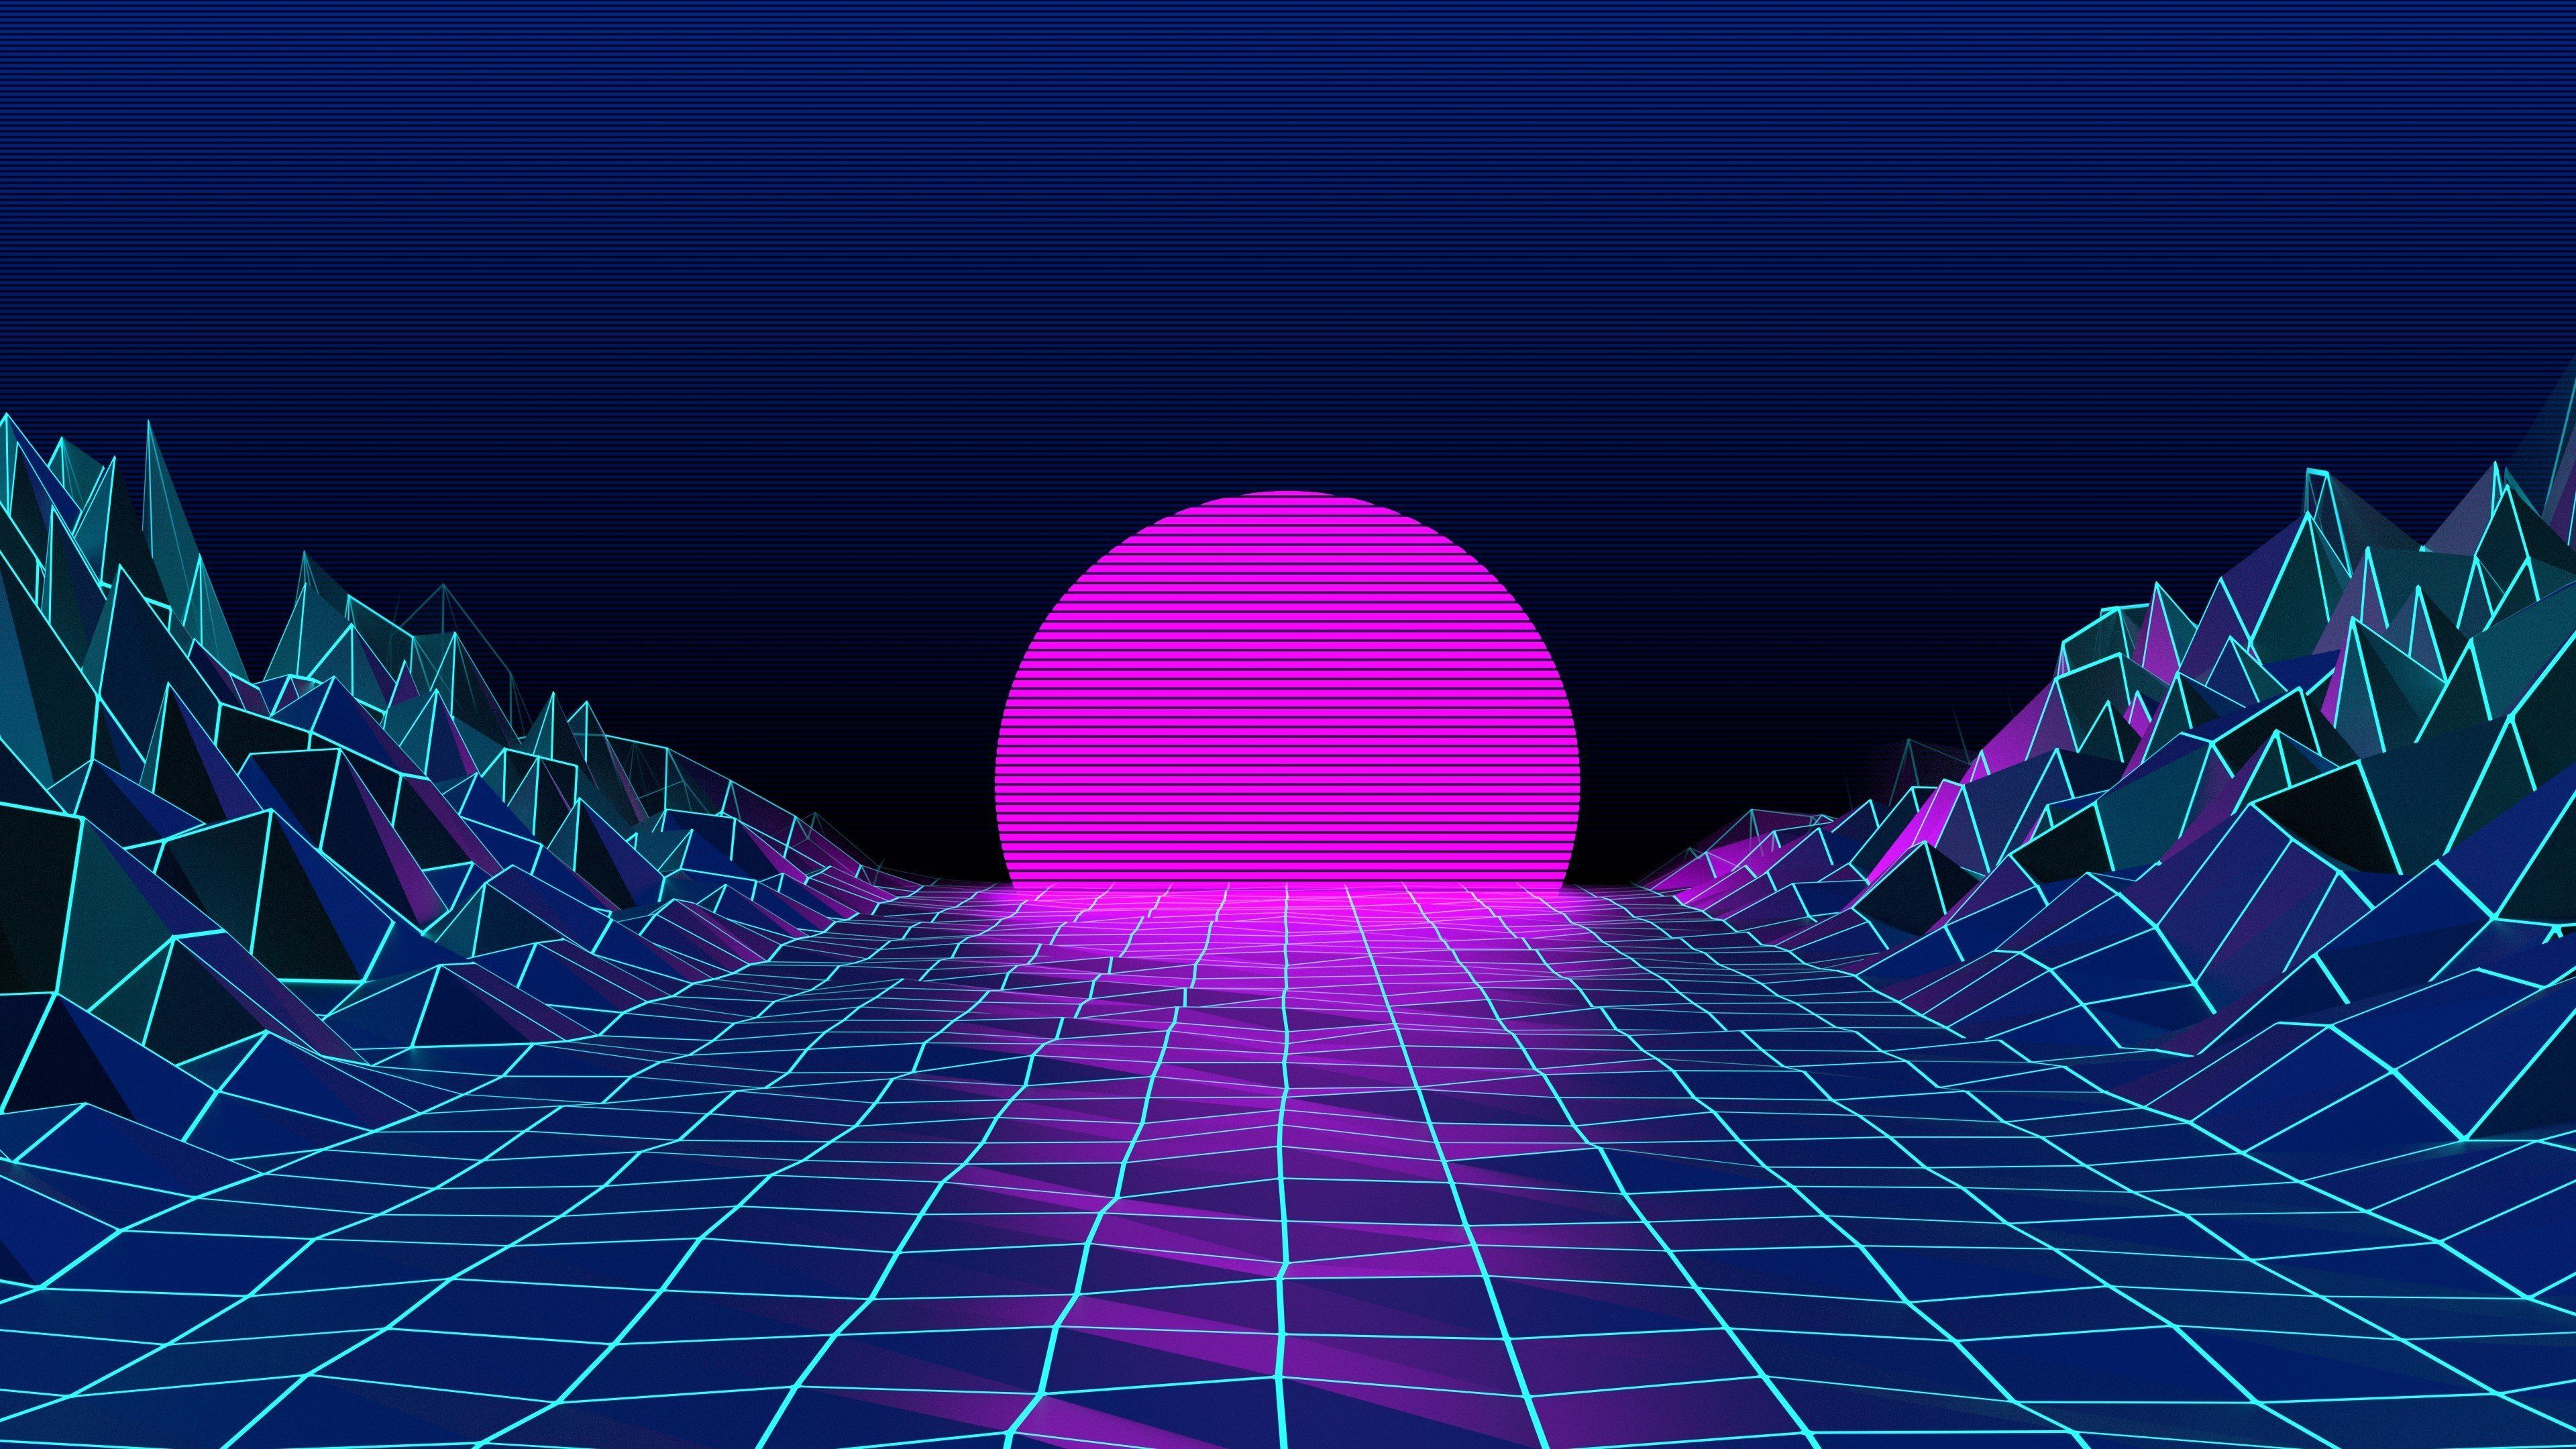 A neon colored tunnel with an egg shaped object - Cool, pattern